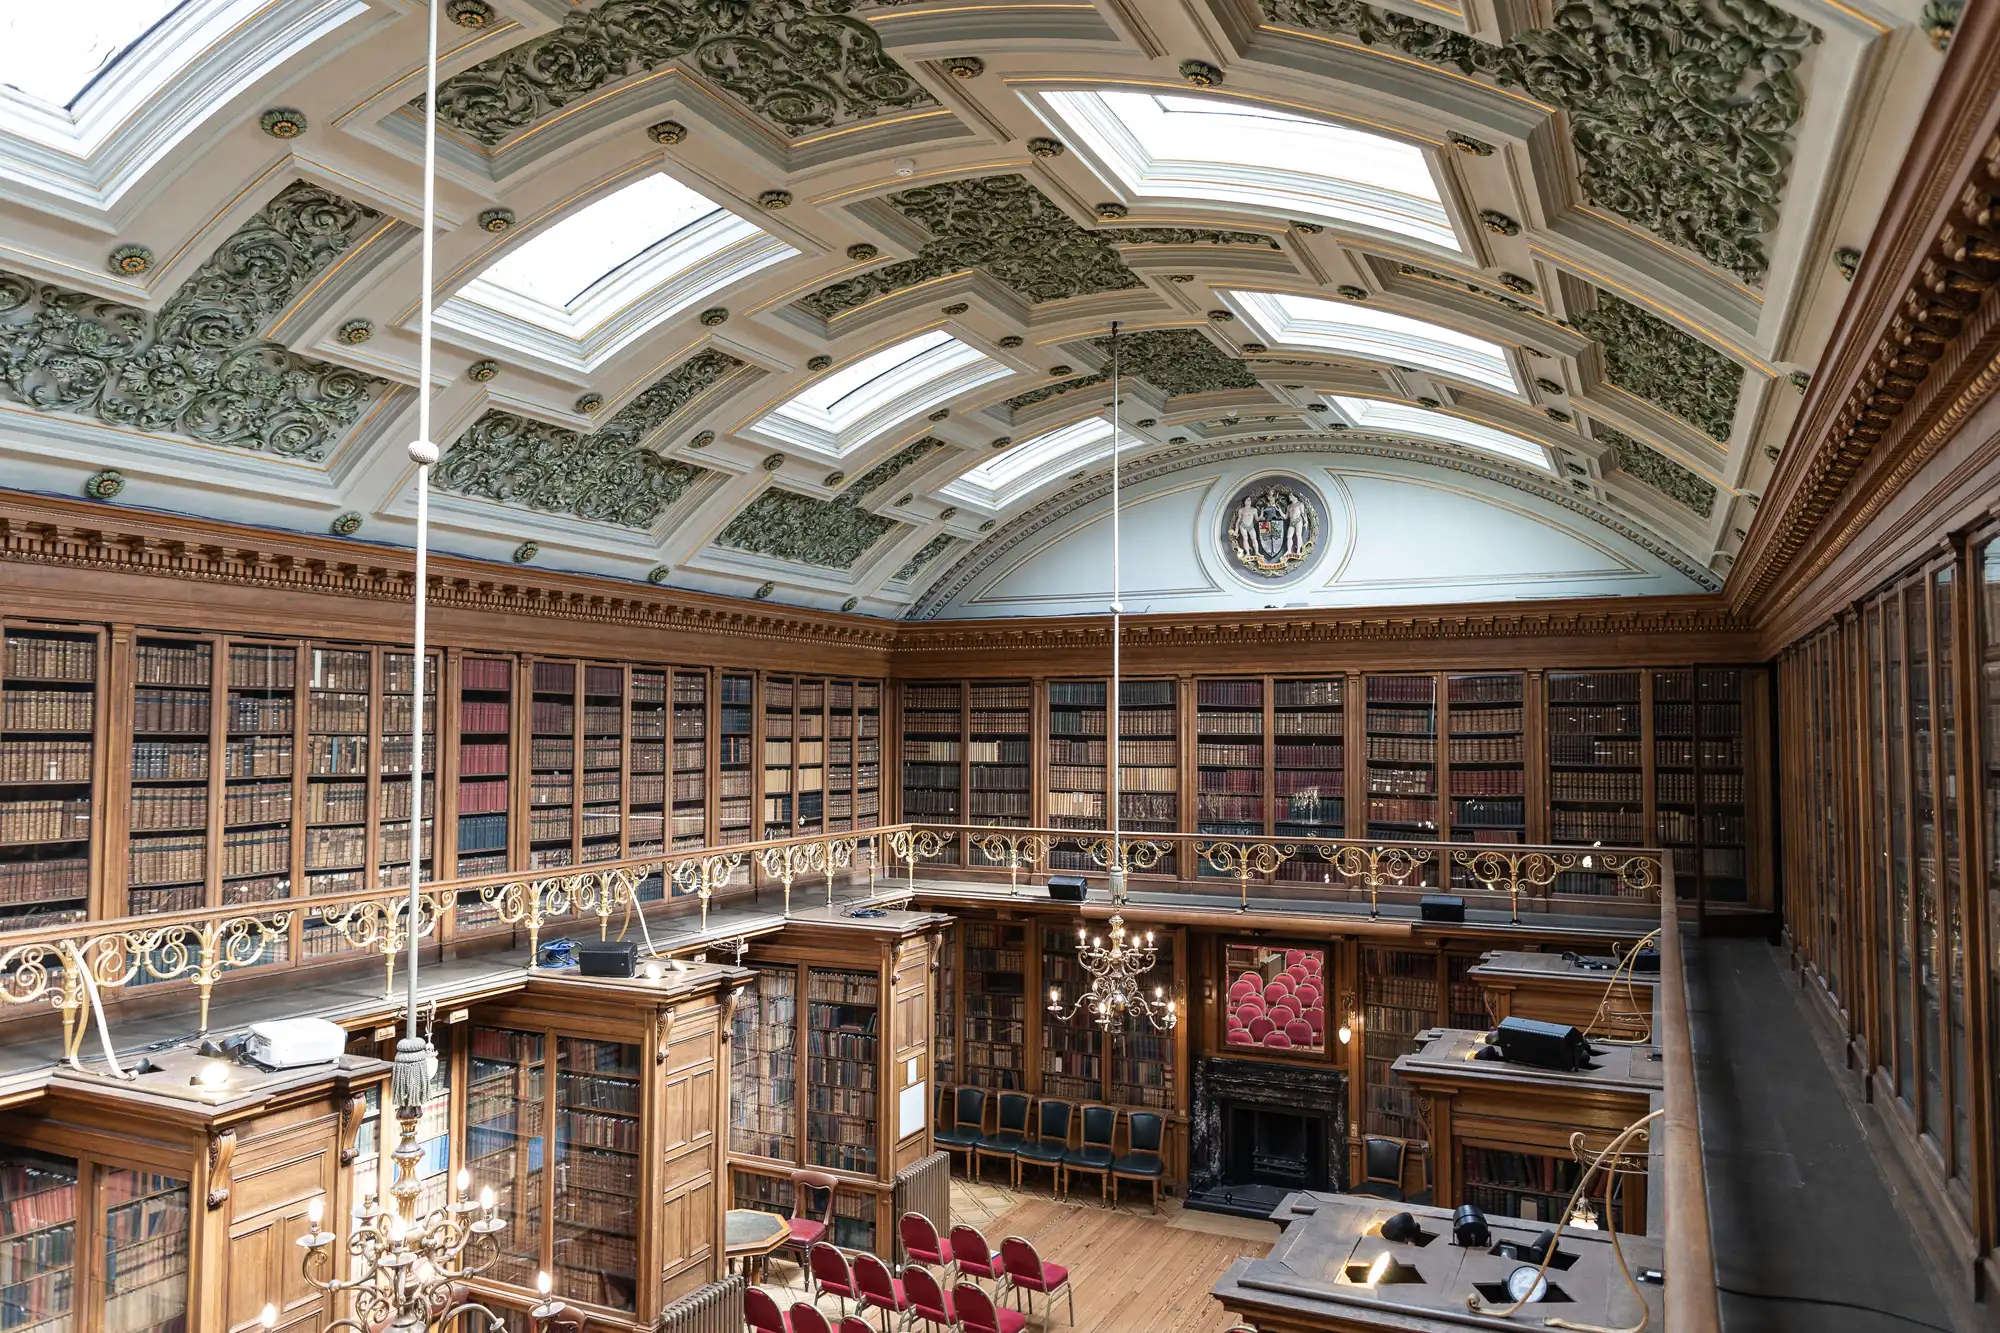 Ornate library interior with wooden bookshelves filled with books, a decorative ceiling with skylights, and a section with red chairs facing a lectern and fireplace.